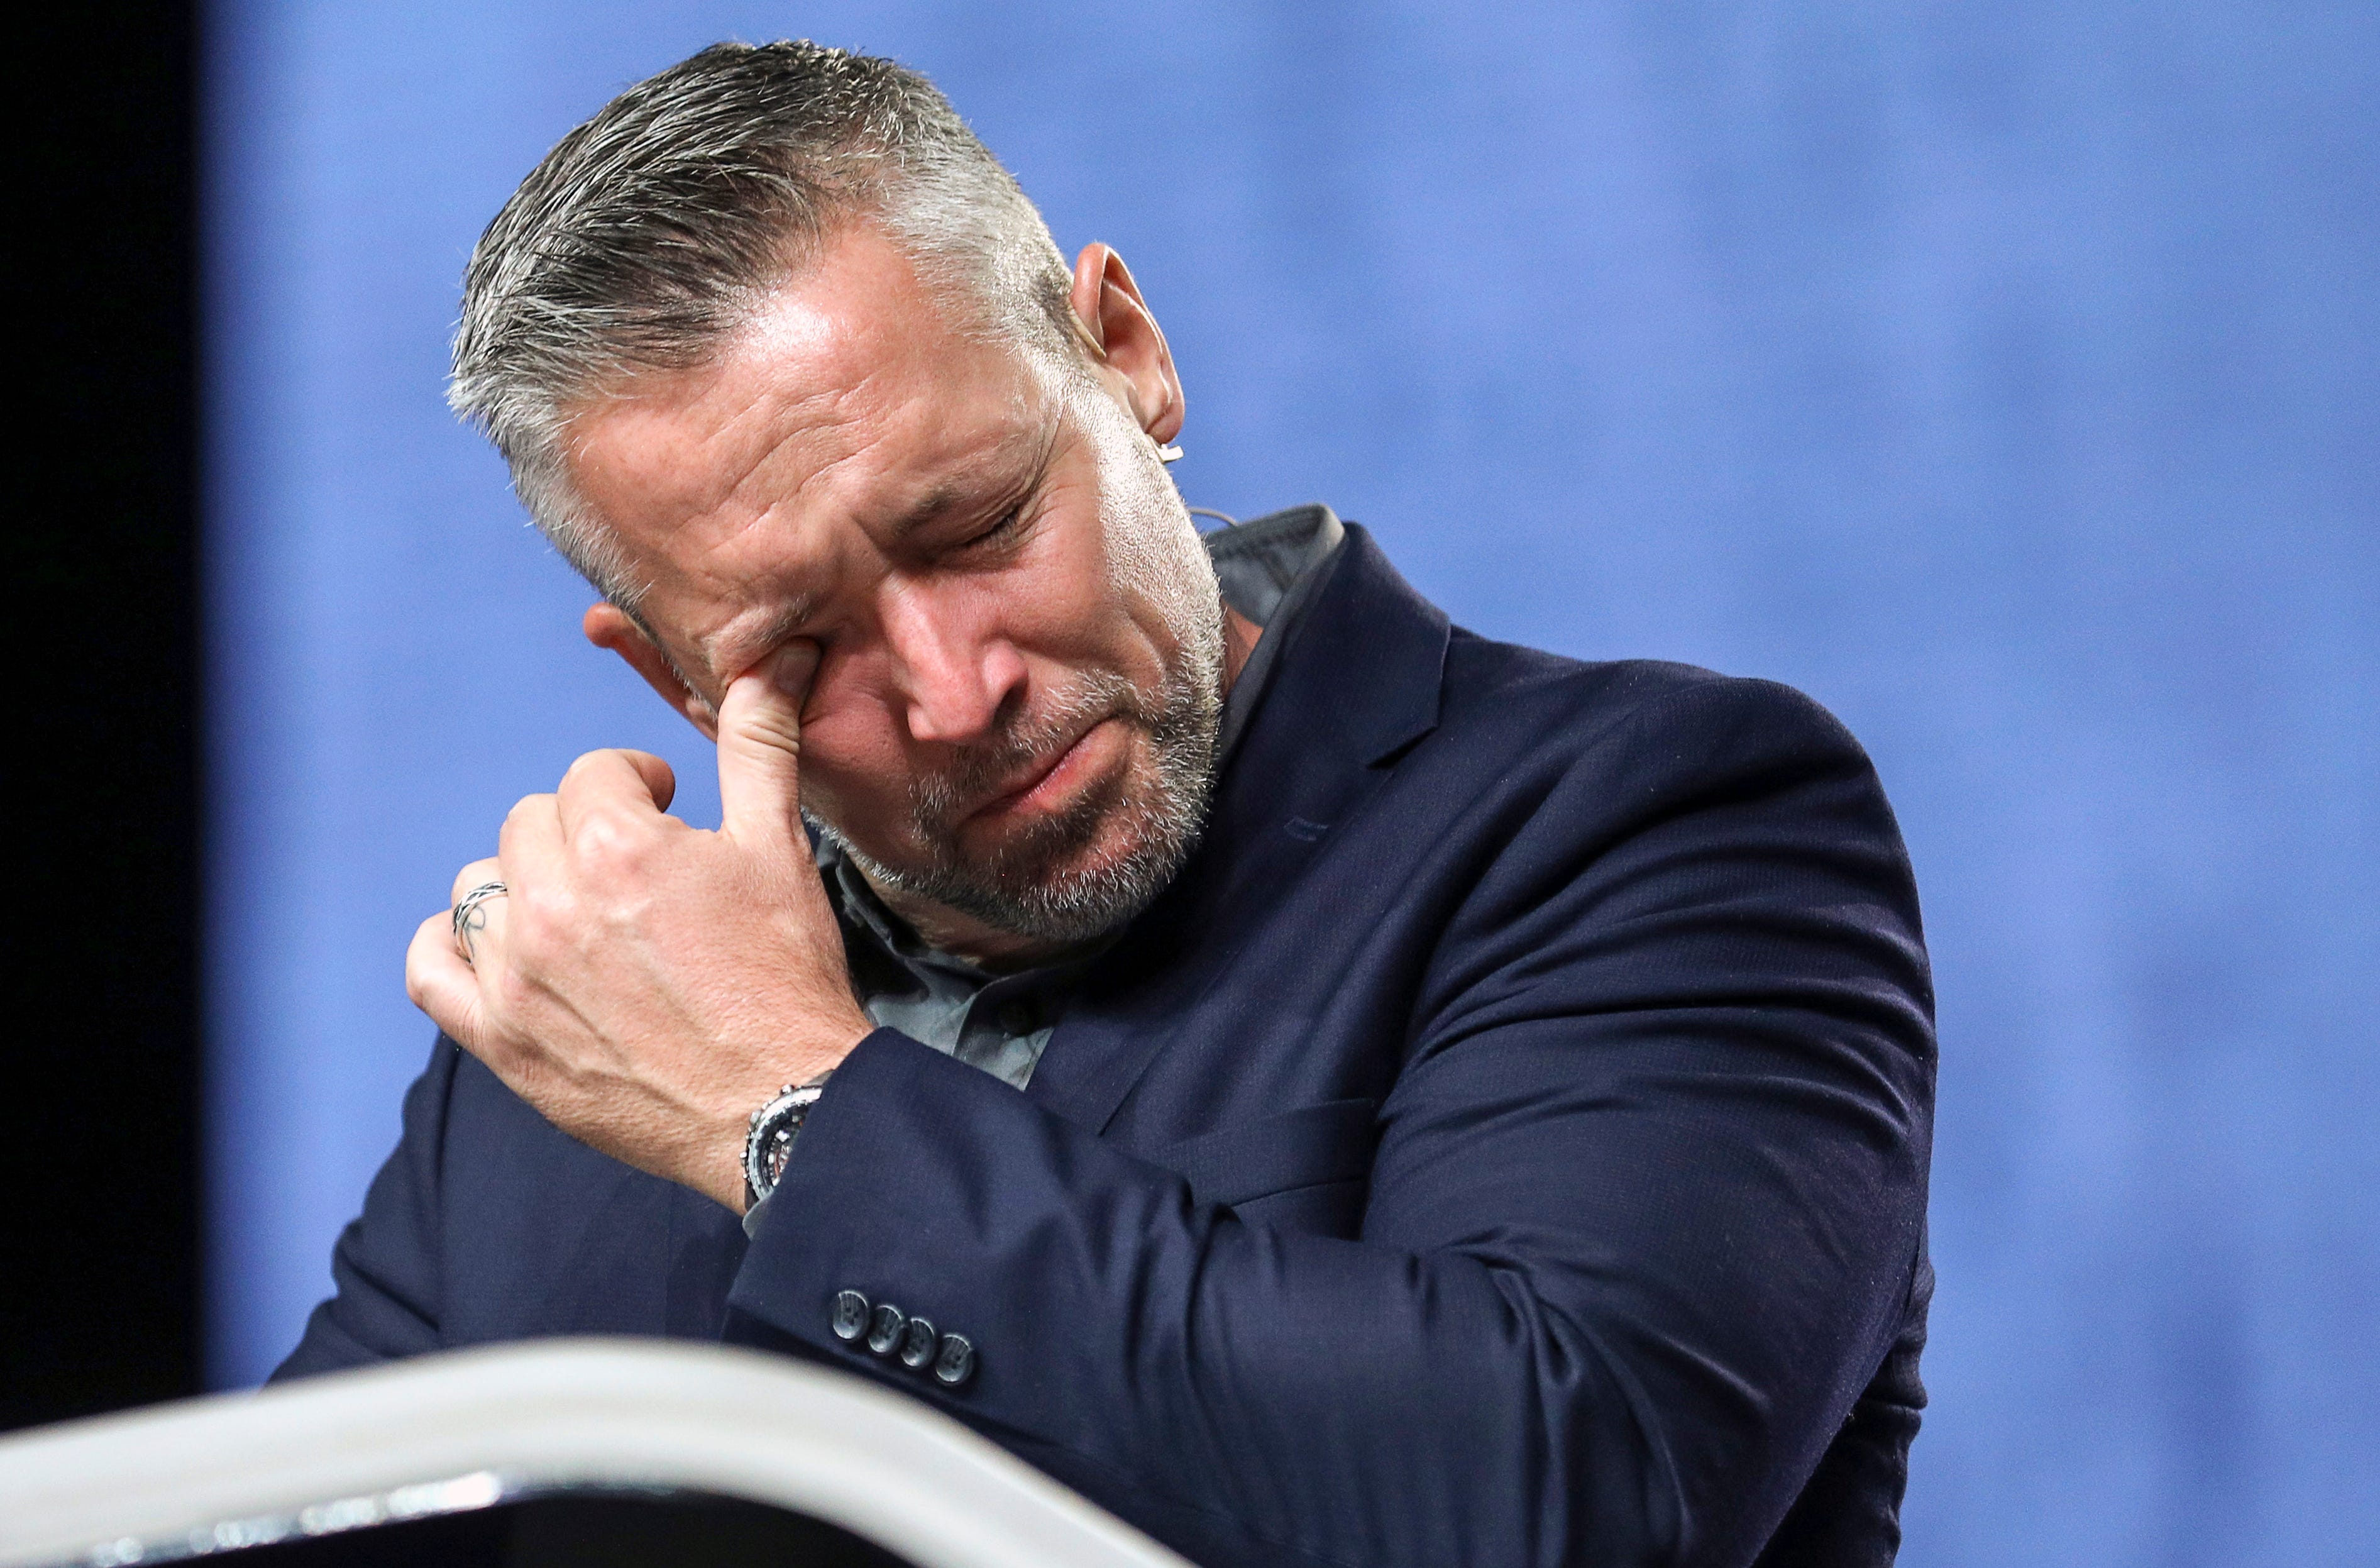 J.D. Greear, president of the Southern Baptist Convention, becomes emotional while talking about sexual abuse within the SBC on the second day of the SBC's annual meeting on Wednesday, June 12, 2019, in Birmingham, Ala. Greear has apologized for the sexual abuse crisis besetting his denomination and outlined an array of steps to address it.